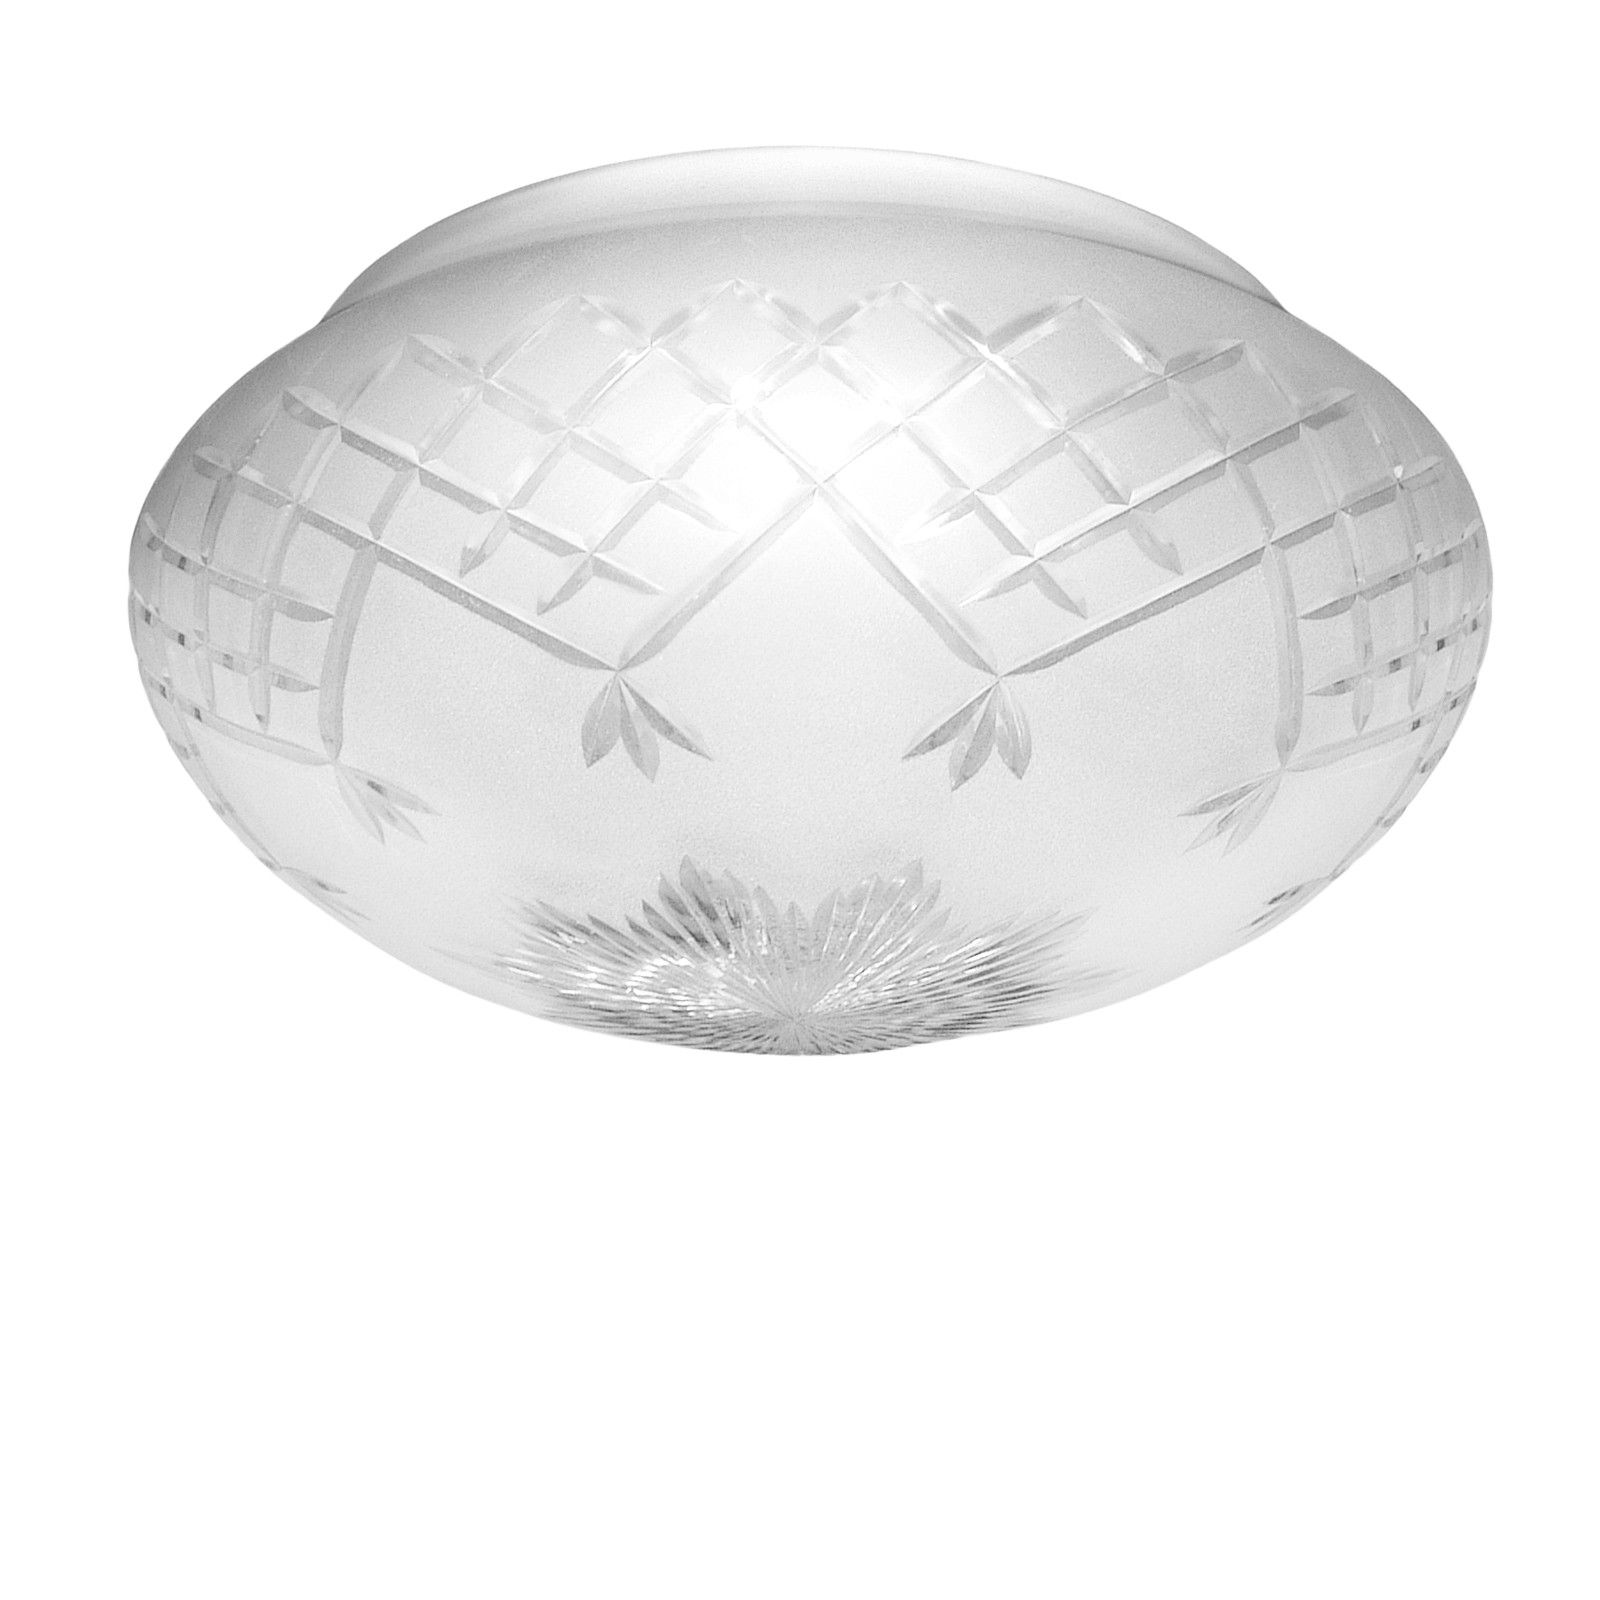 Pineapple ceiling bowl in a choice of sizes